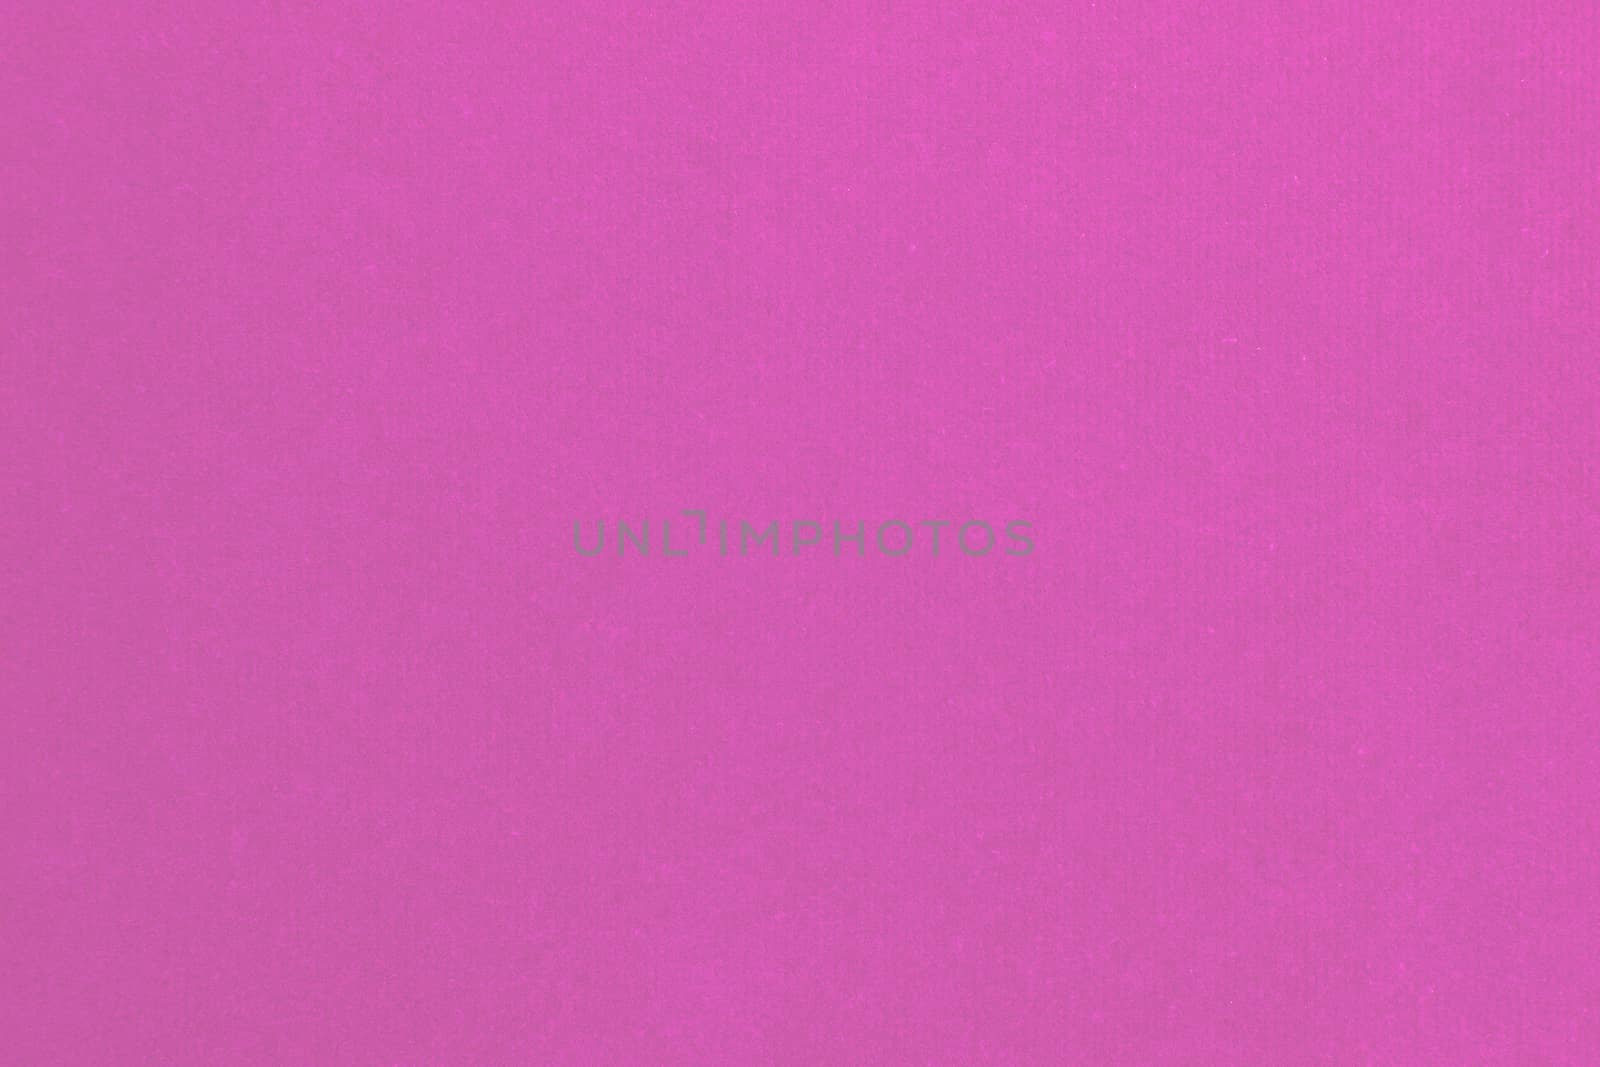 Pink texture background for valentine's day